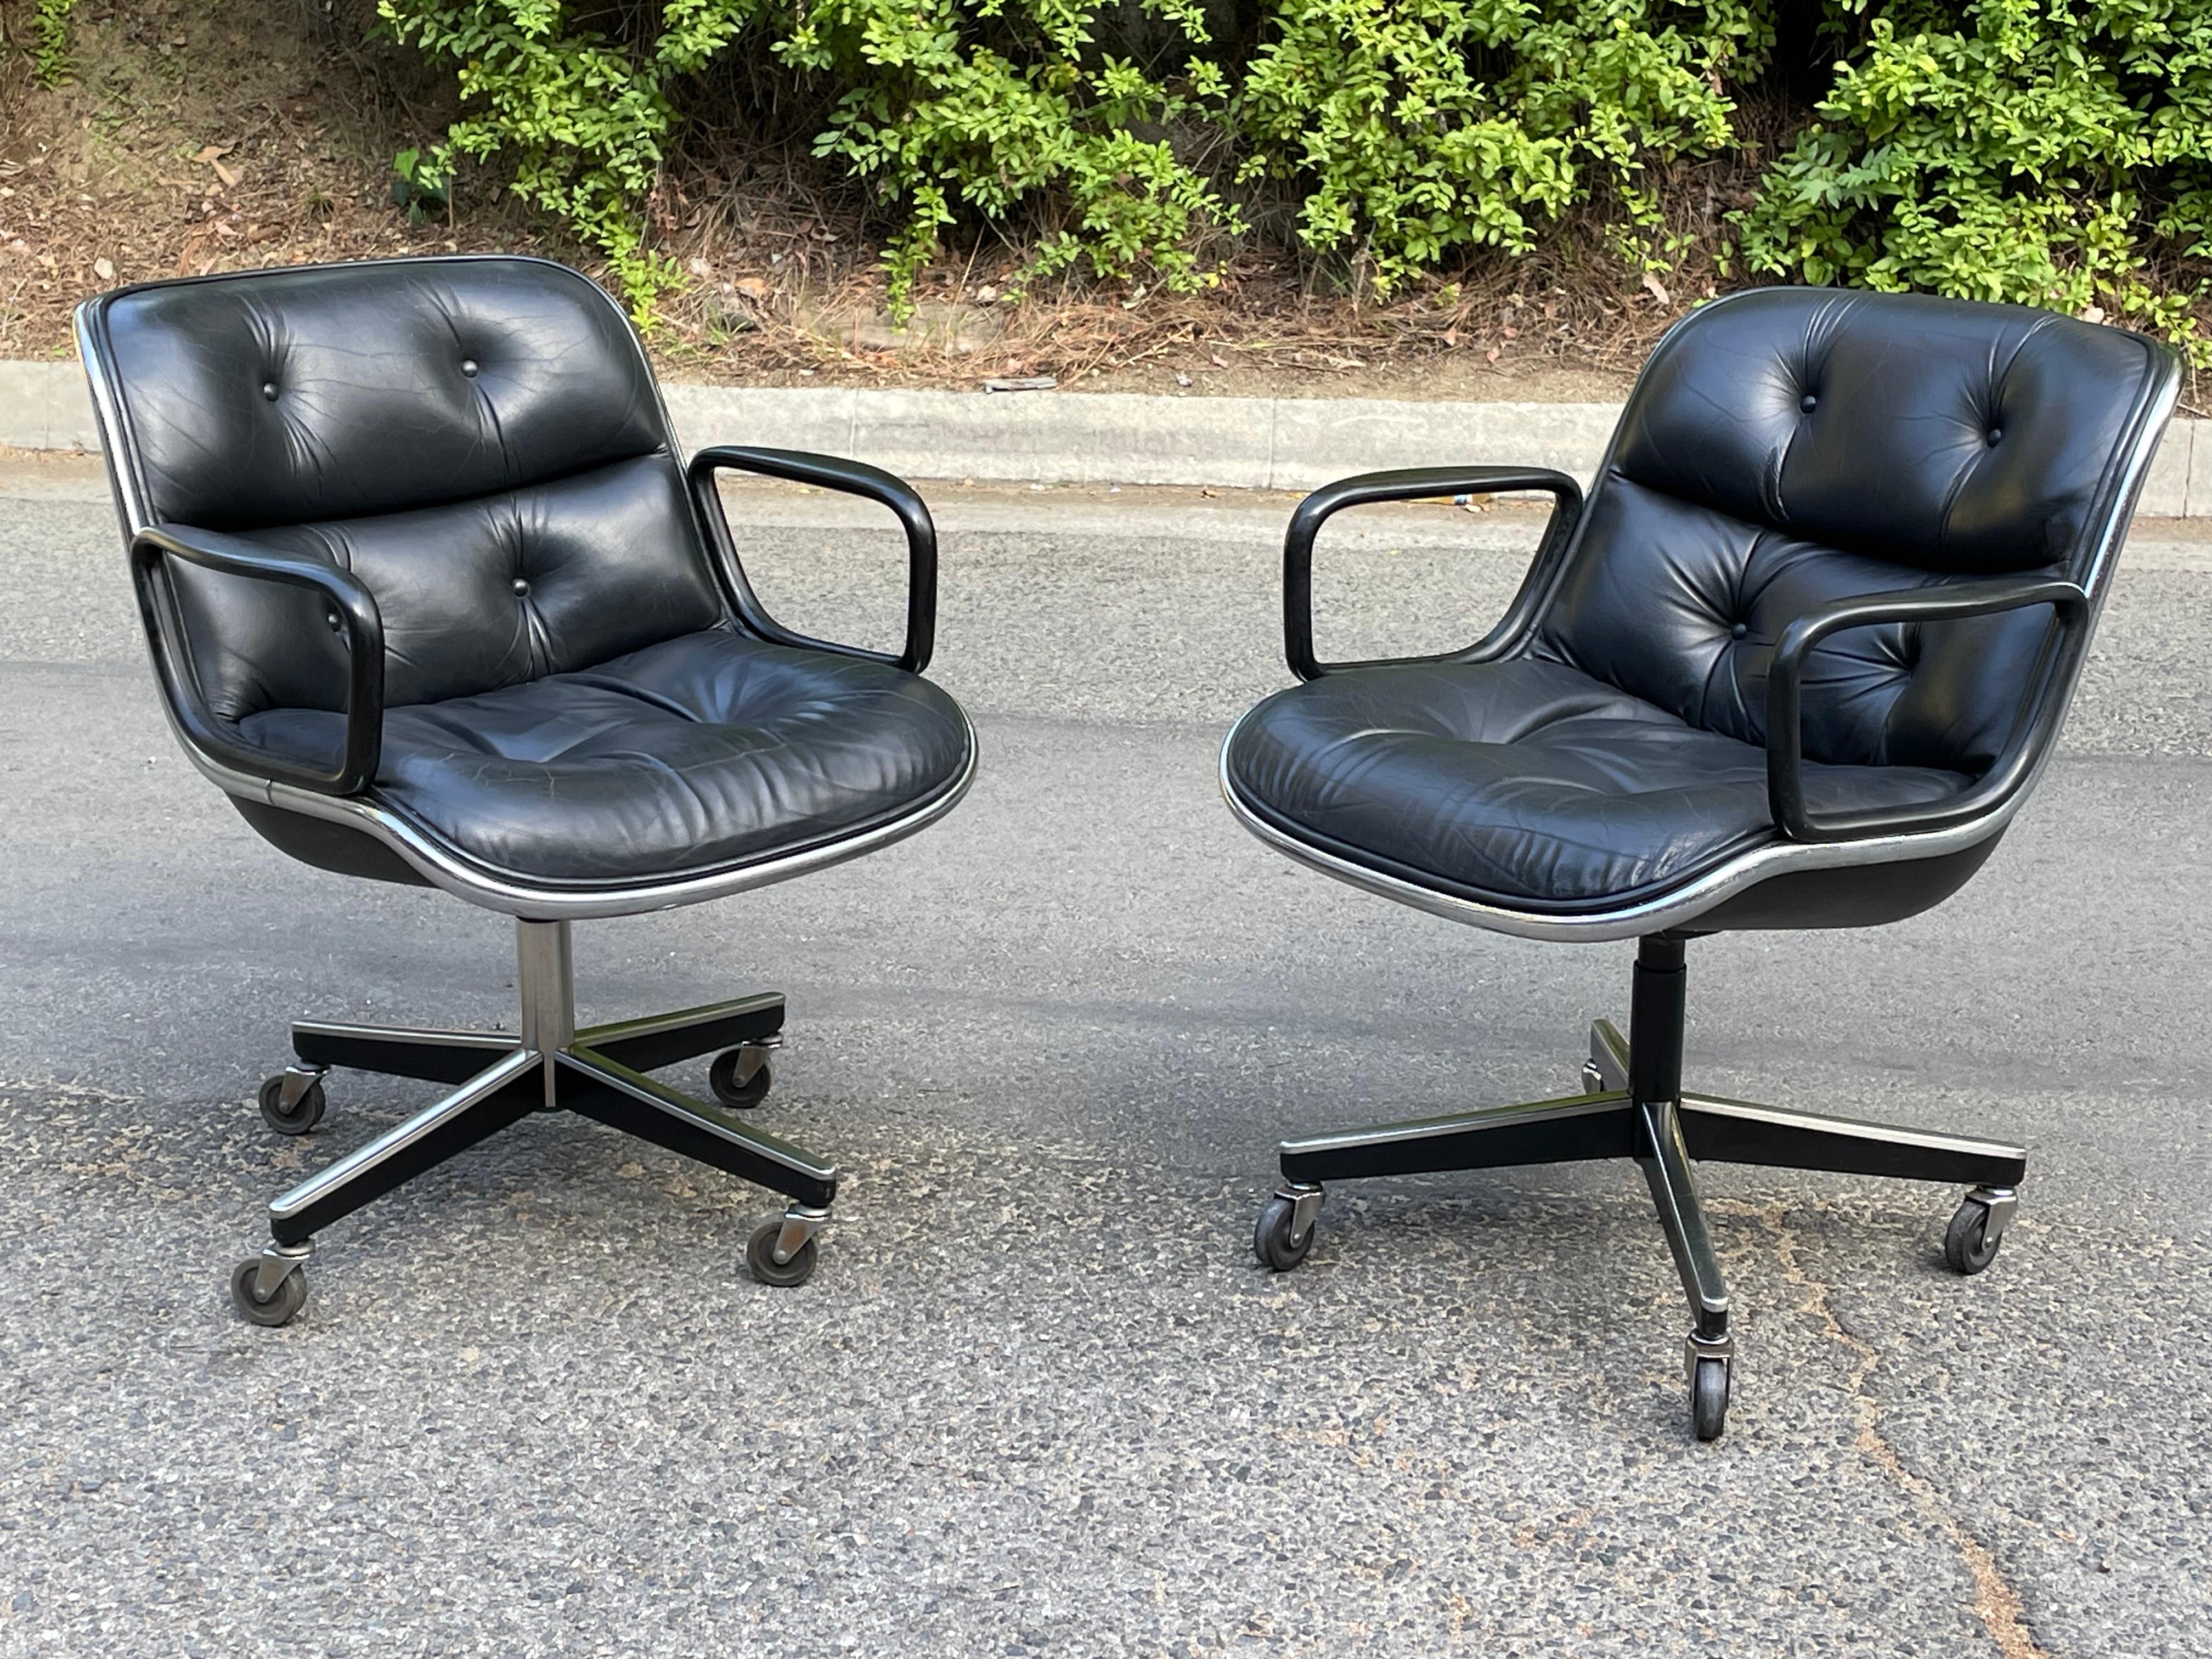 Gorgeous PAIR of vintage original black leather Pollock desk chairs designed by Charles Pollack for Knoll. Features original black leather in very good original condition.

On 4-star chrome pedestal bases. With Knoll label underneath.

PRICE IS FOR